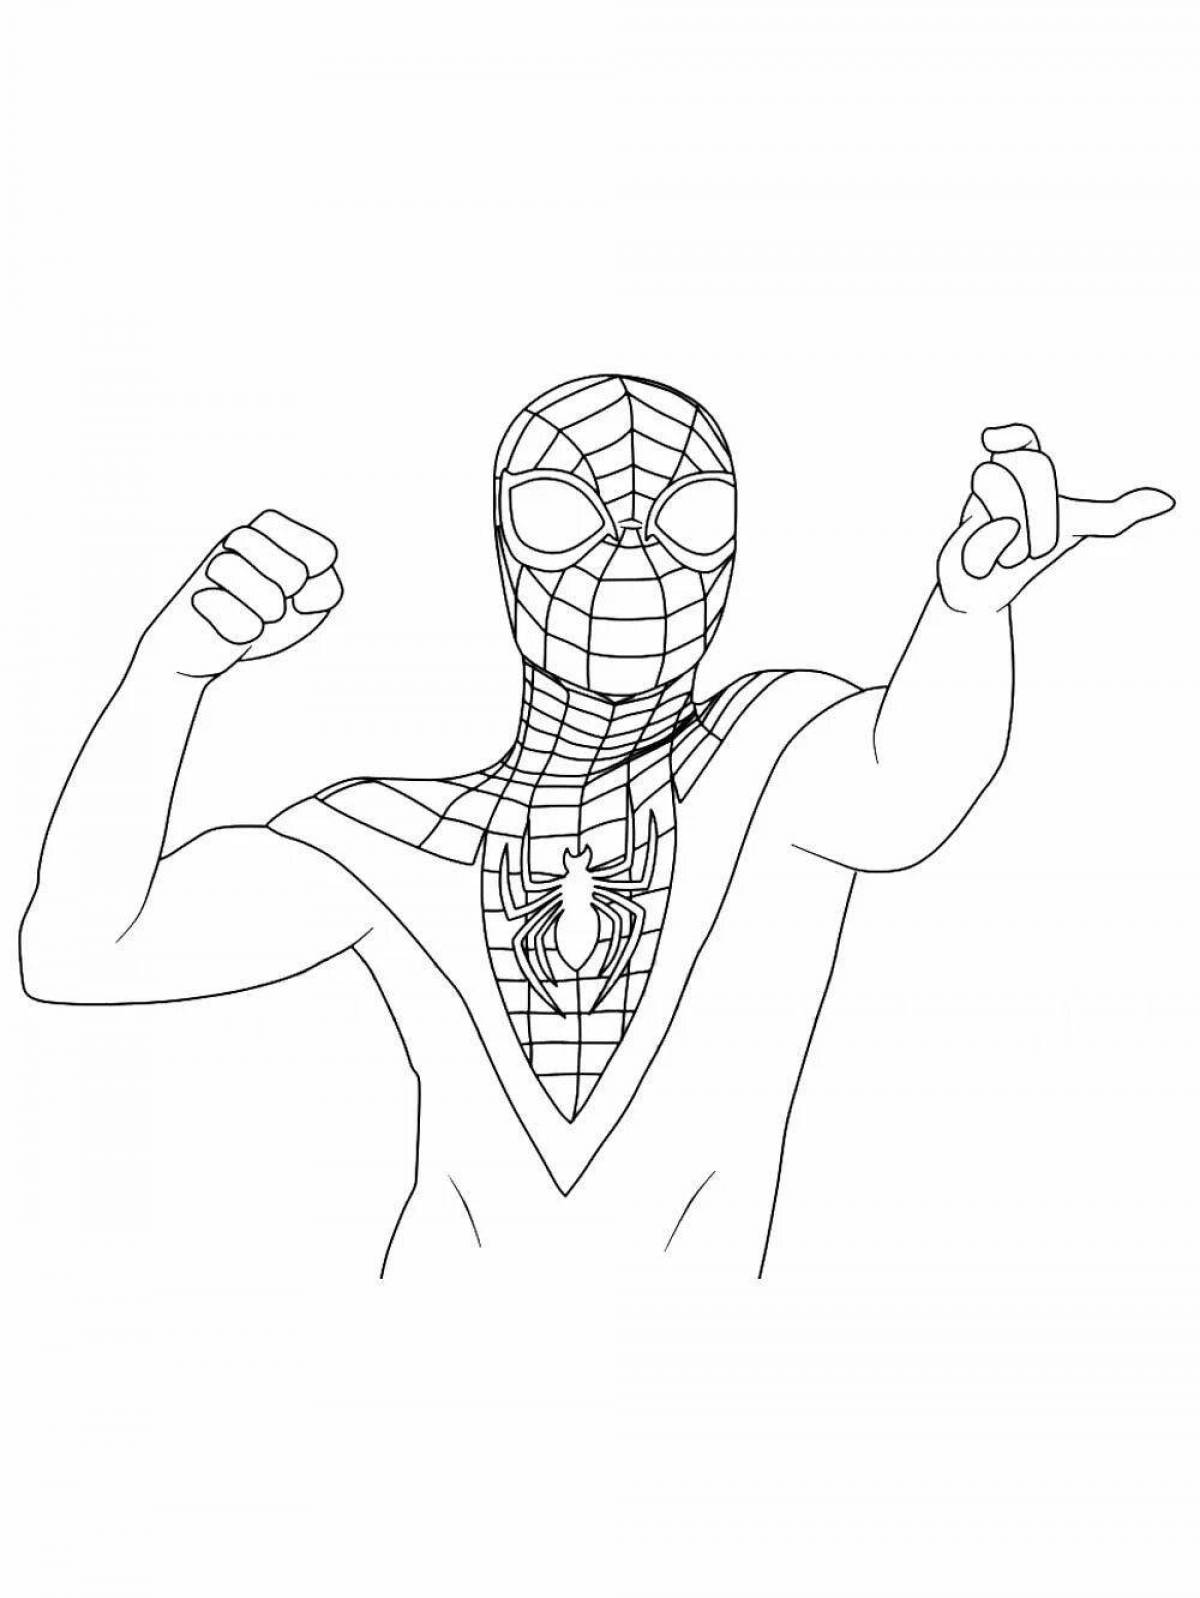 Intriguing spider-man miles coloring book